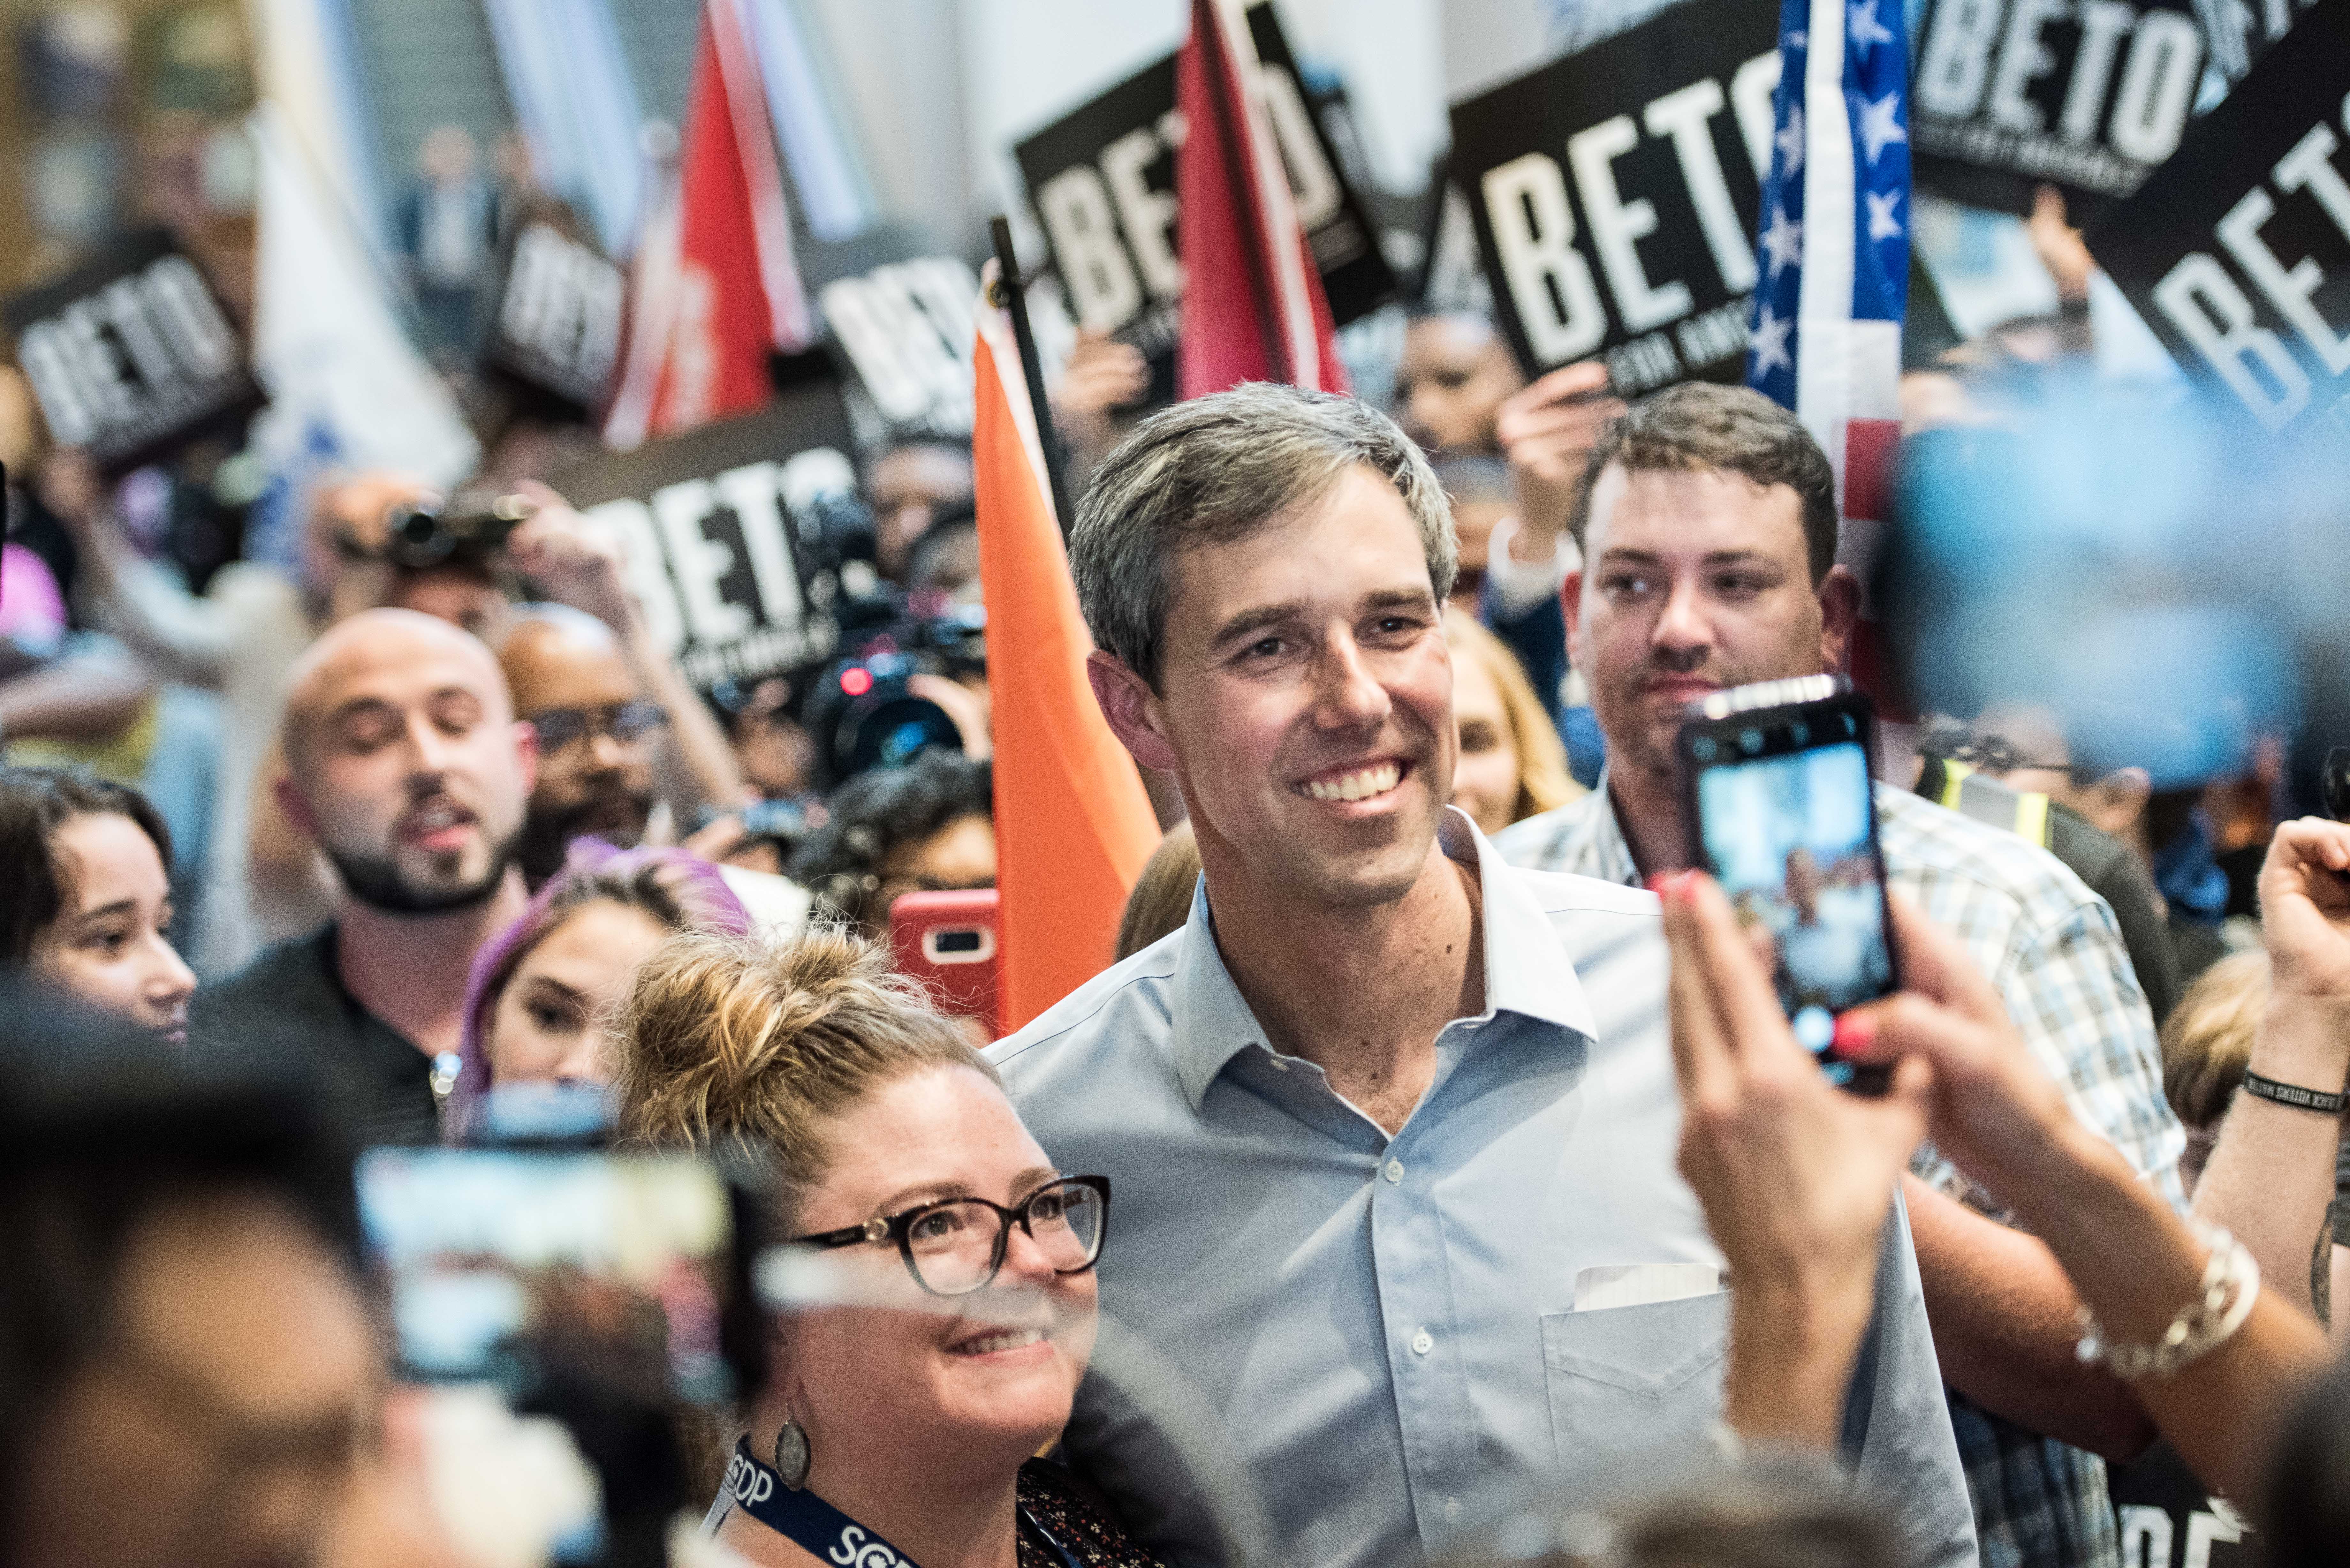 Democratic presidential candidate, former Rep. Beto ORourke poses for photos with conference attendees during the 2019 South Carolina Democratic Party State Convention on June 22, 2019 in Columbia, South Carolina. (Photo by Sean Rayford/Getty Images)